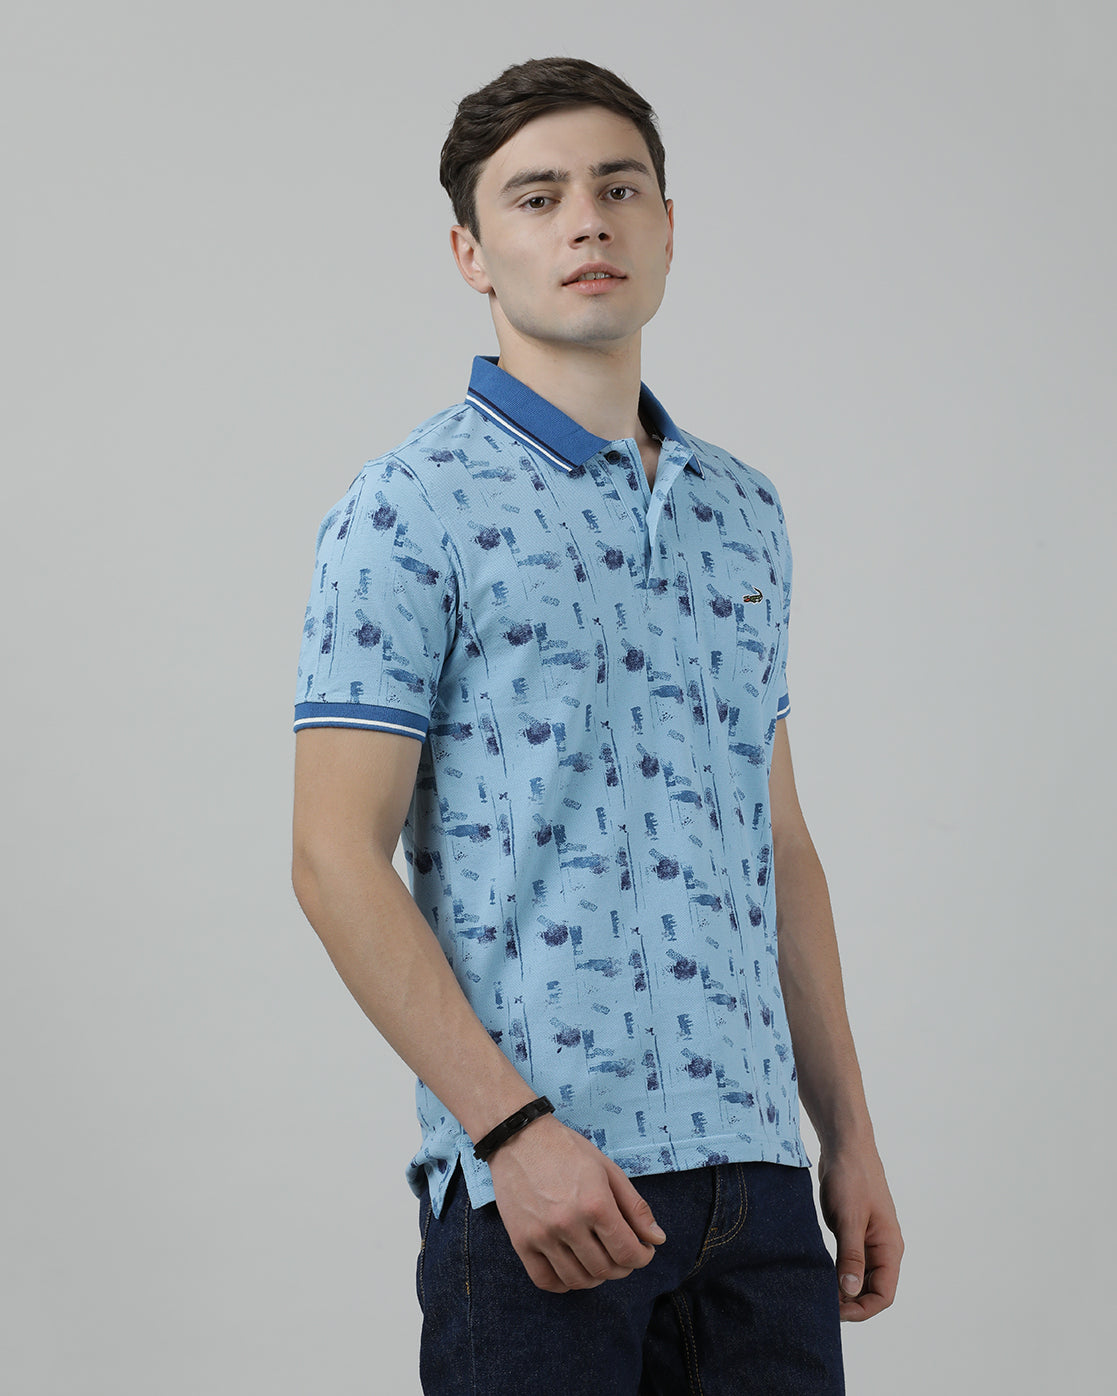 Casual Light Blue T-Shirt Polo Printed Half Sleeve Slim Fit with Collar for Men